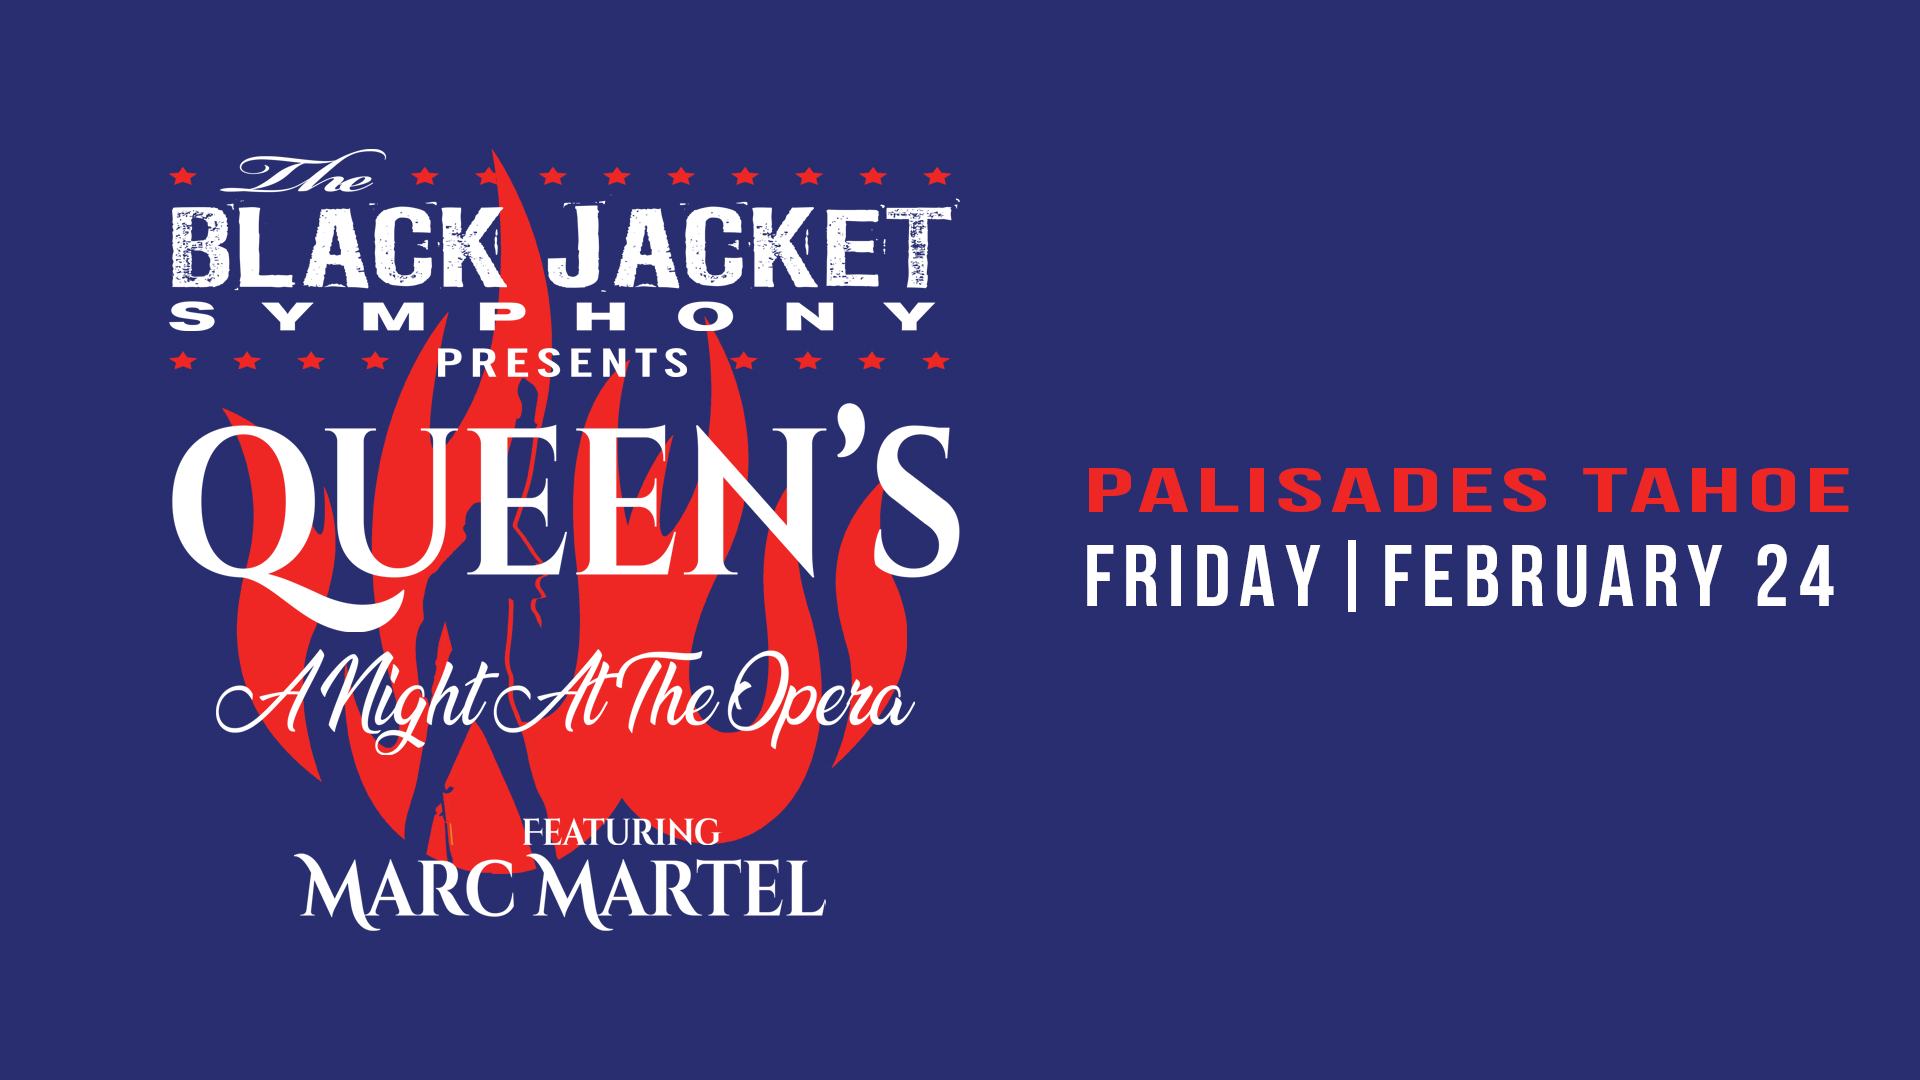 The Black Jacket Symphony featuring Marc Martel Presenting Queen's A Night at the Opera